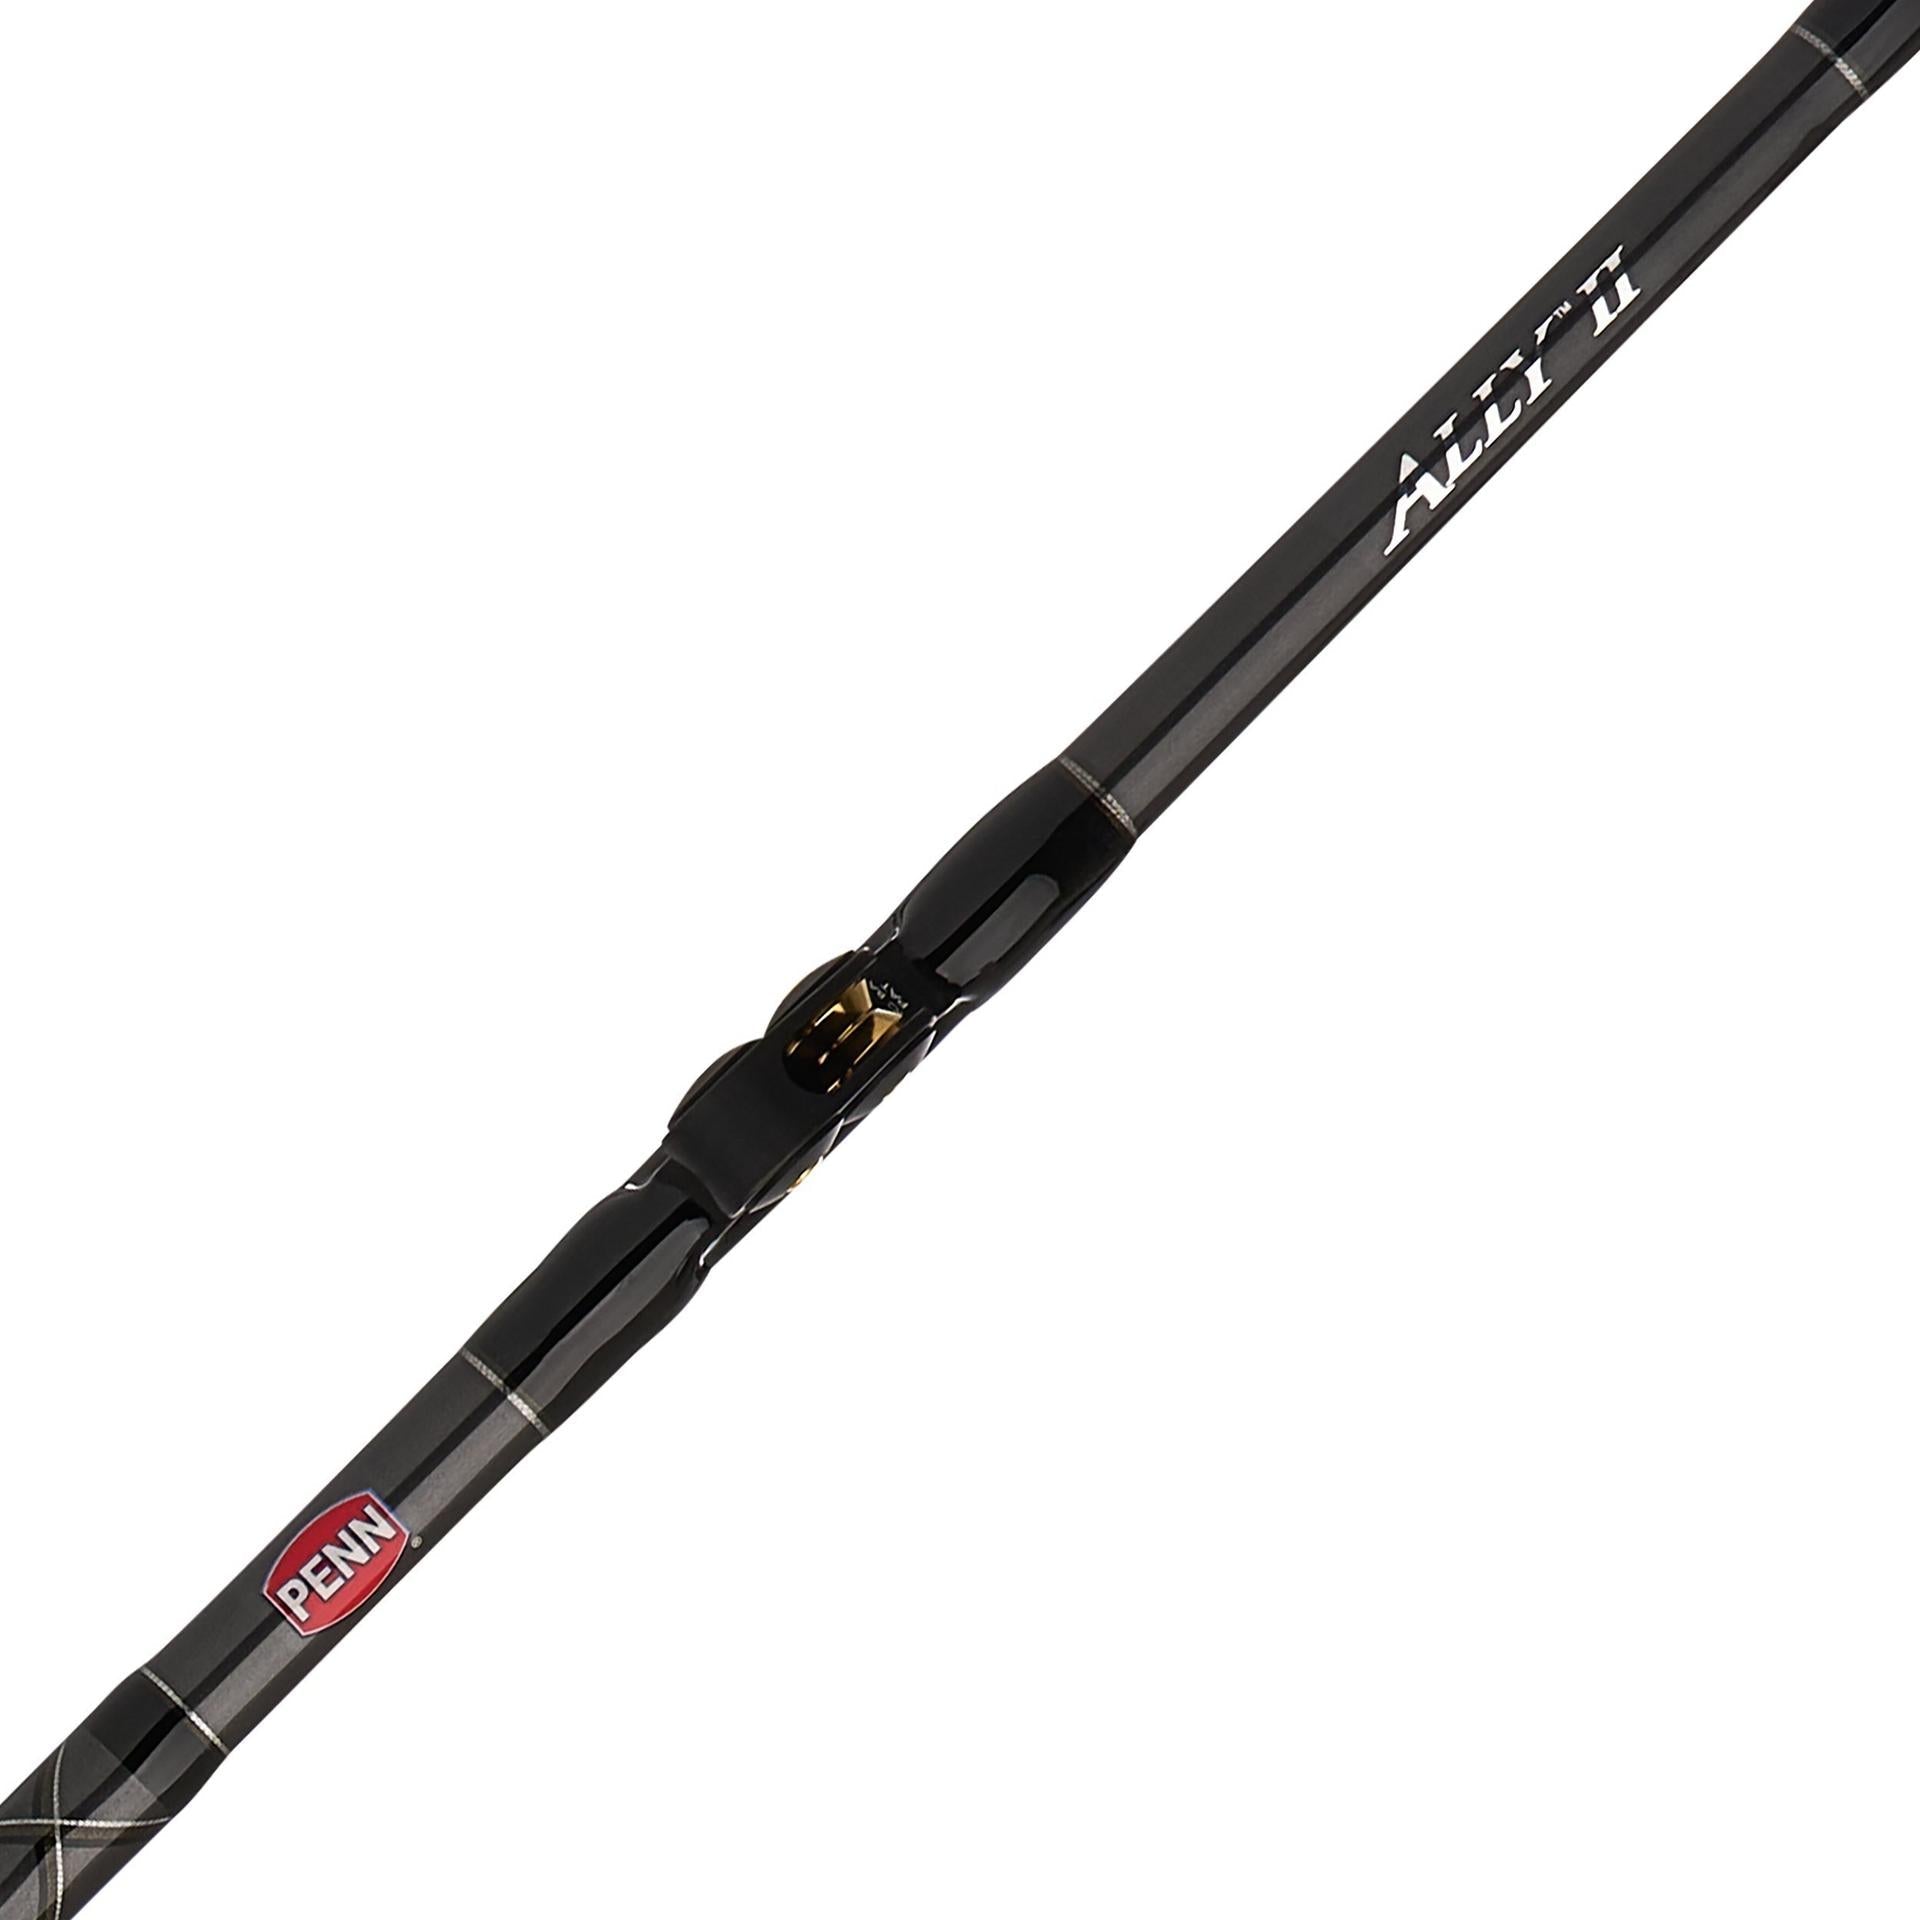 Ally™ II Straight Butt Conventional Boat Rod